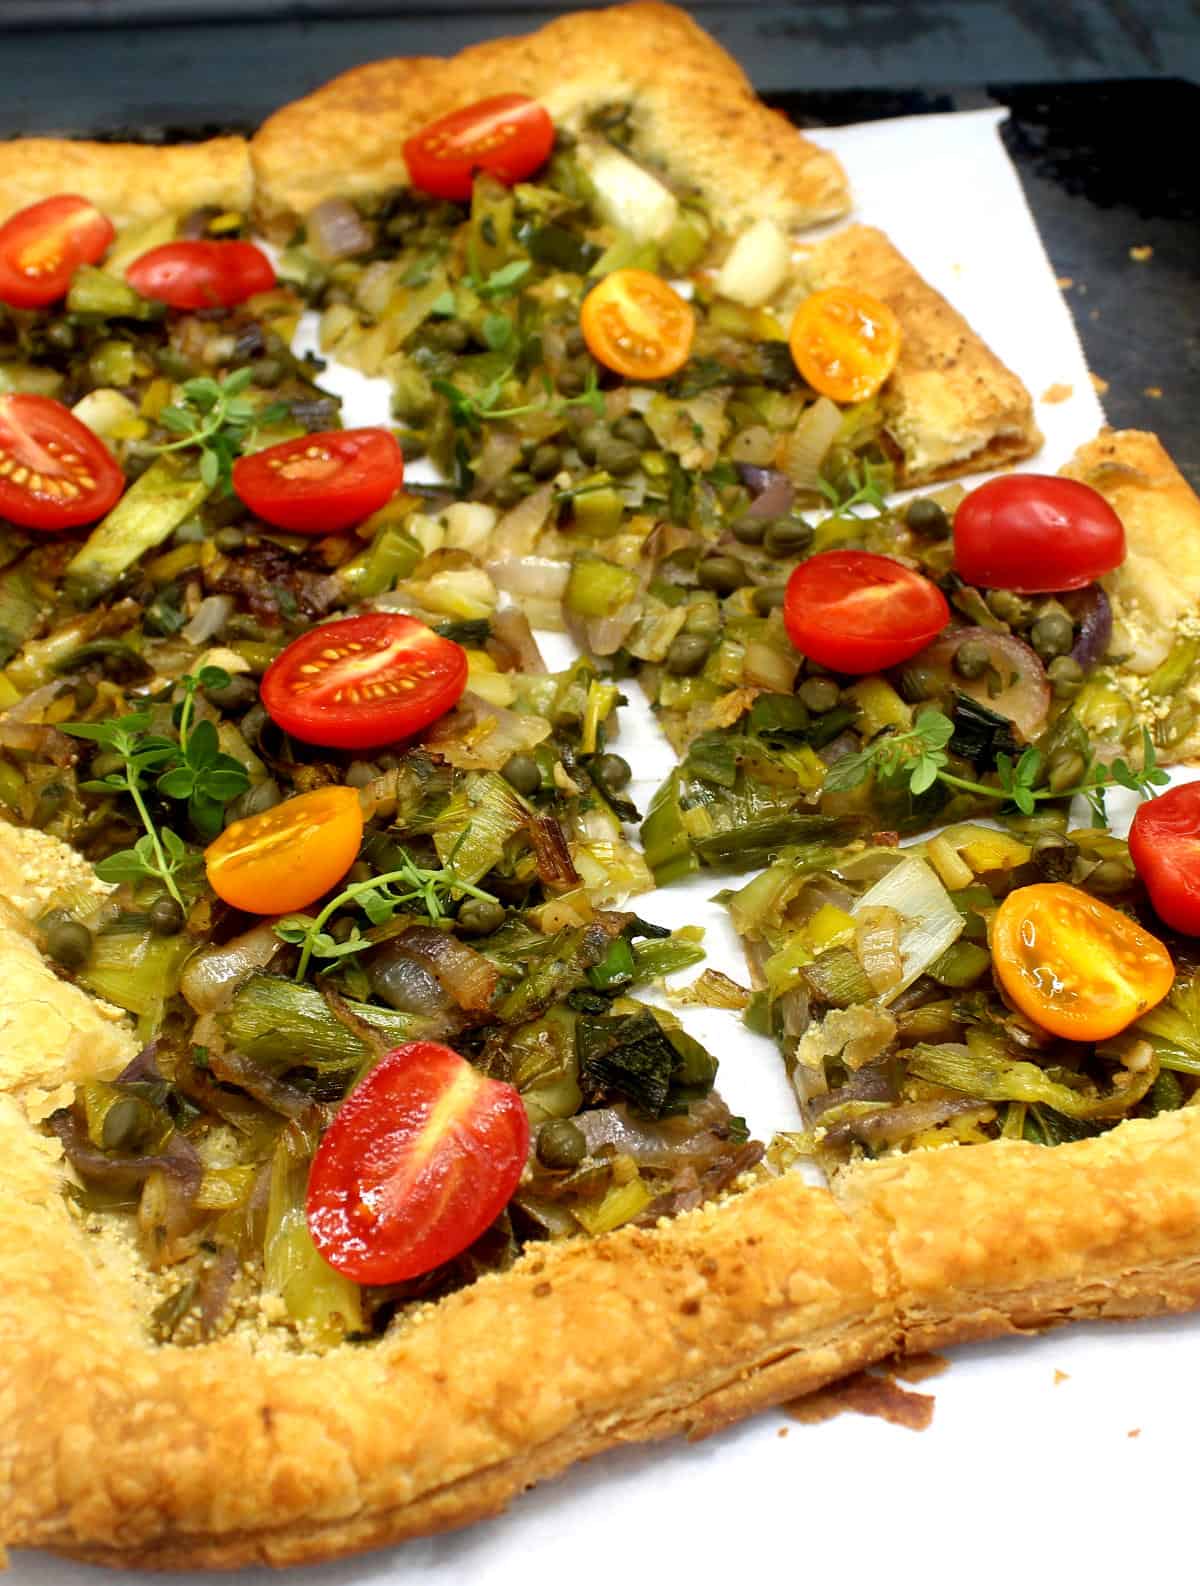 Photo of vegan leek and scallion pizza with crispy puff pastry crust and topped with scallions, leeks, cherry tomatoes and capers.